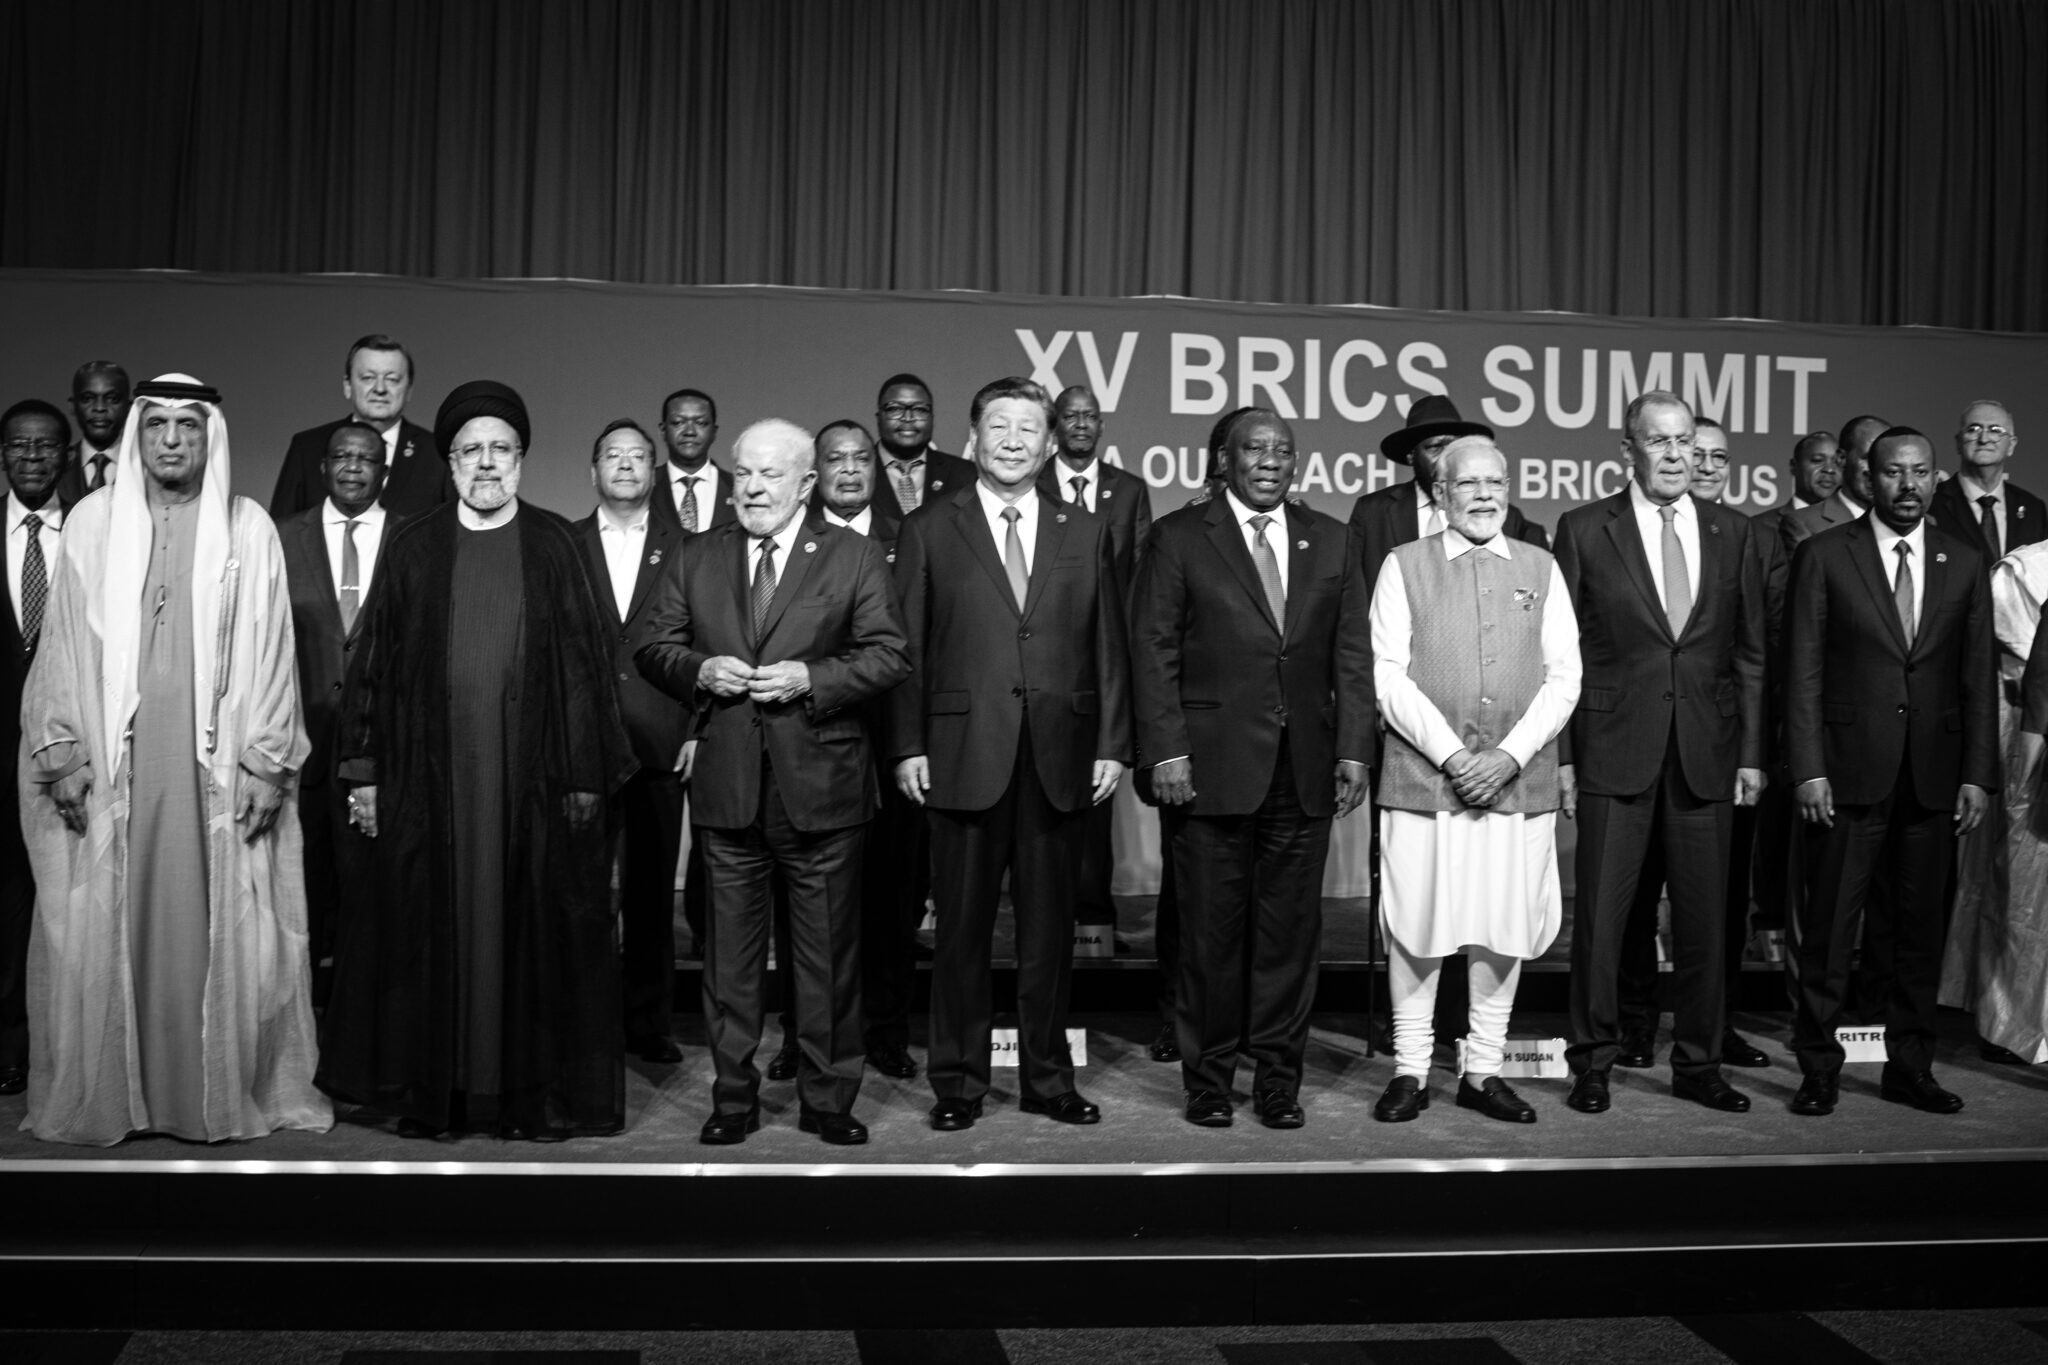 BRICS Offers a Glimpse of What a New Global World Order Could Look Like